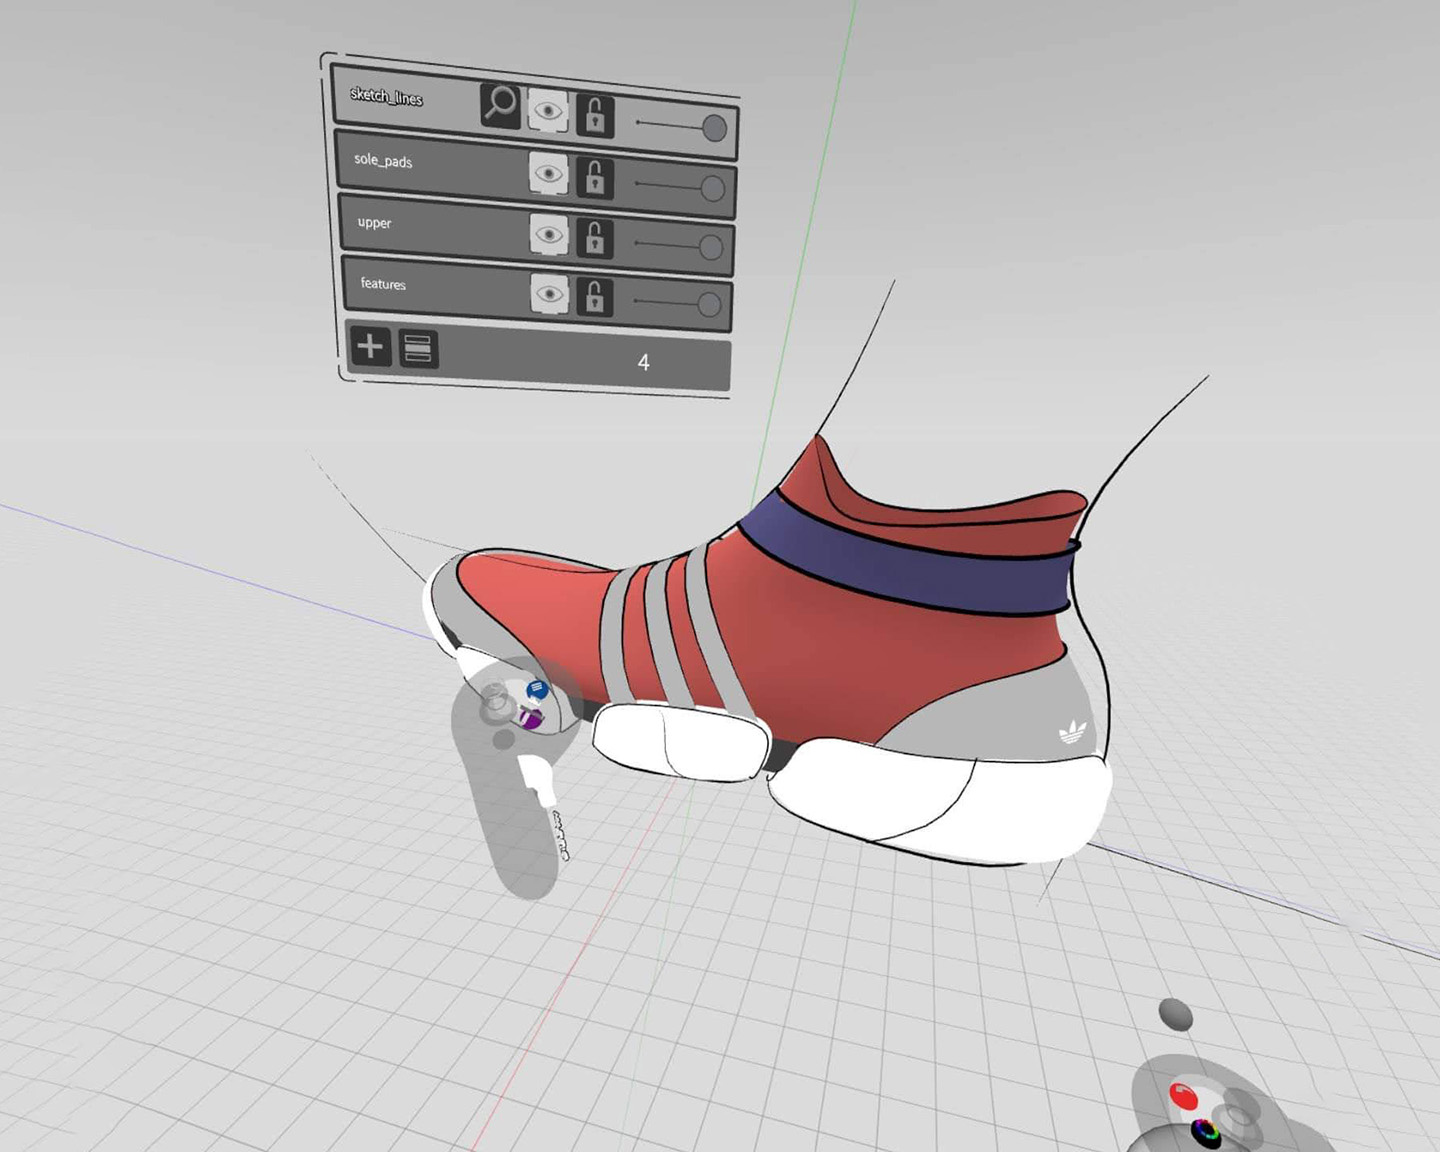 Sketching a shoe in the Gravity Sketch virtual reality environment